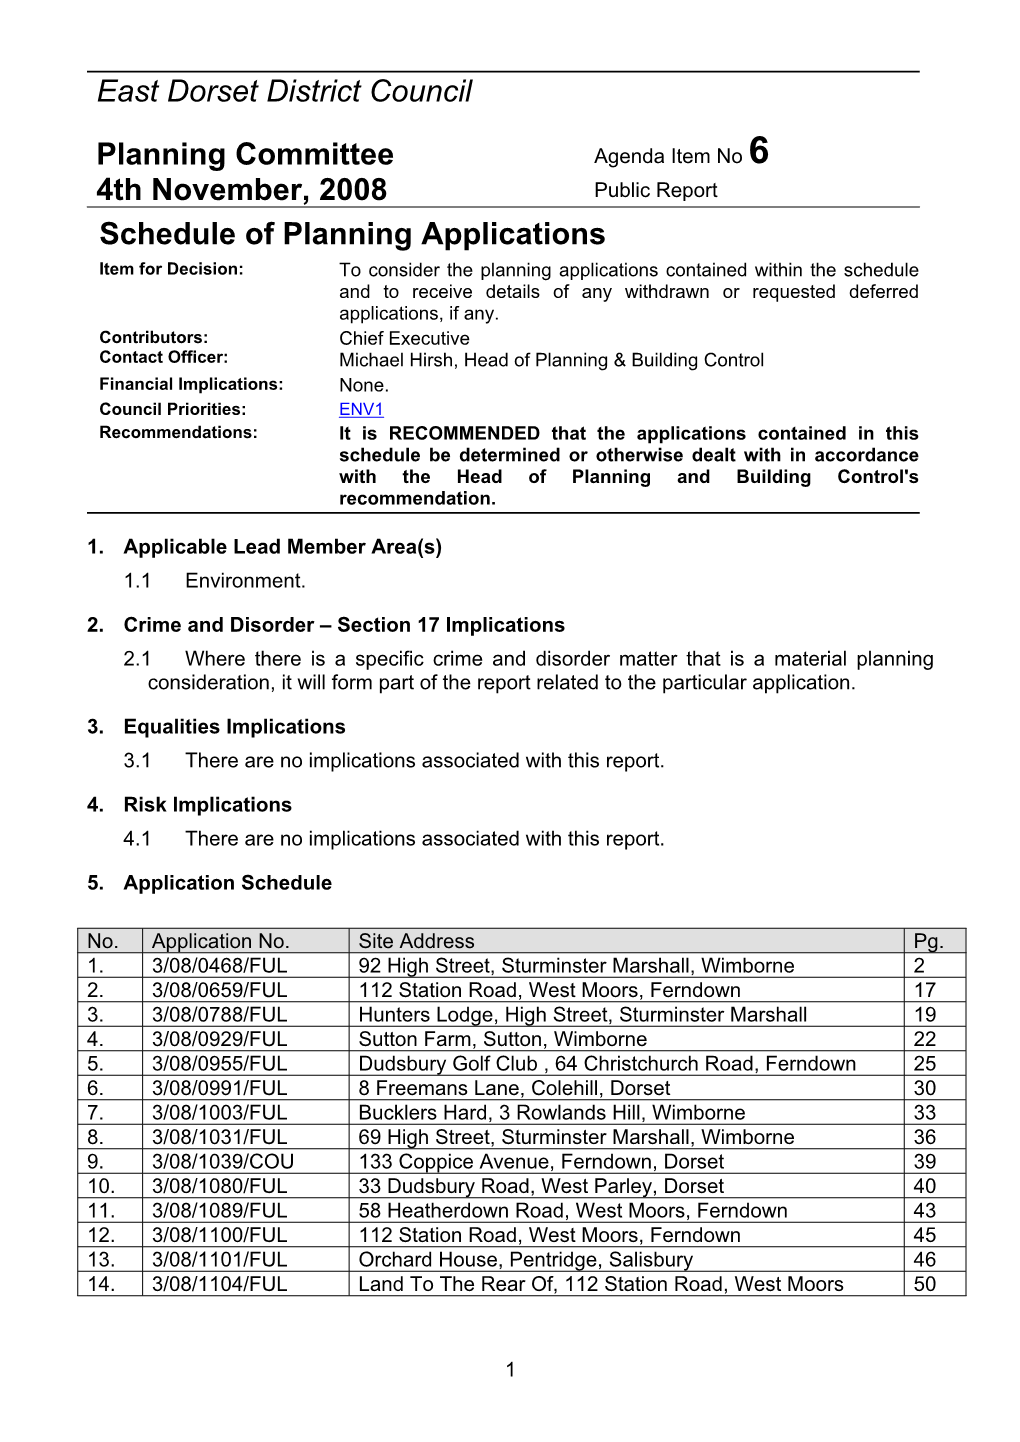 Schedule of Planning Applications